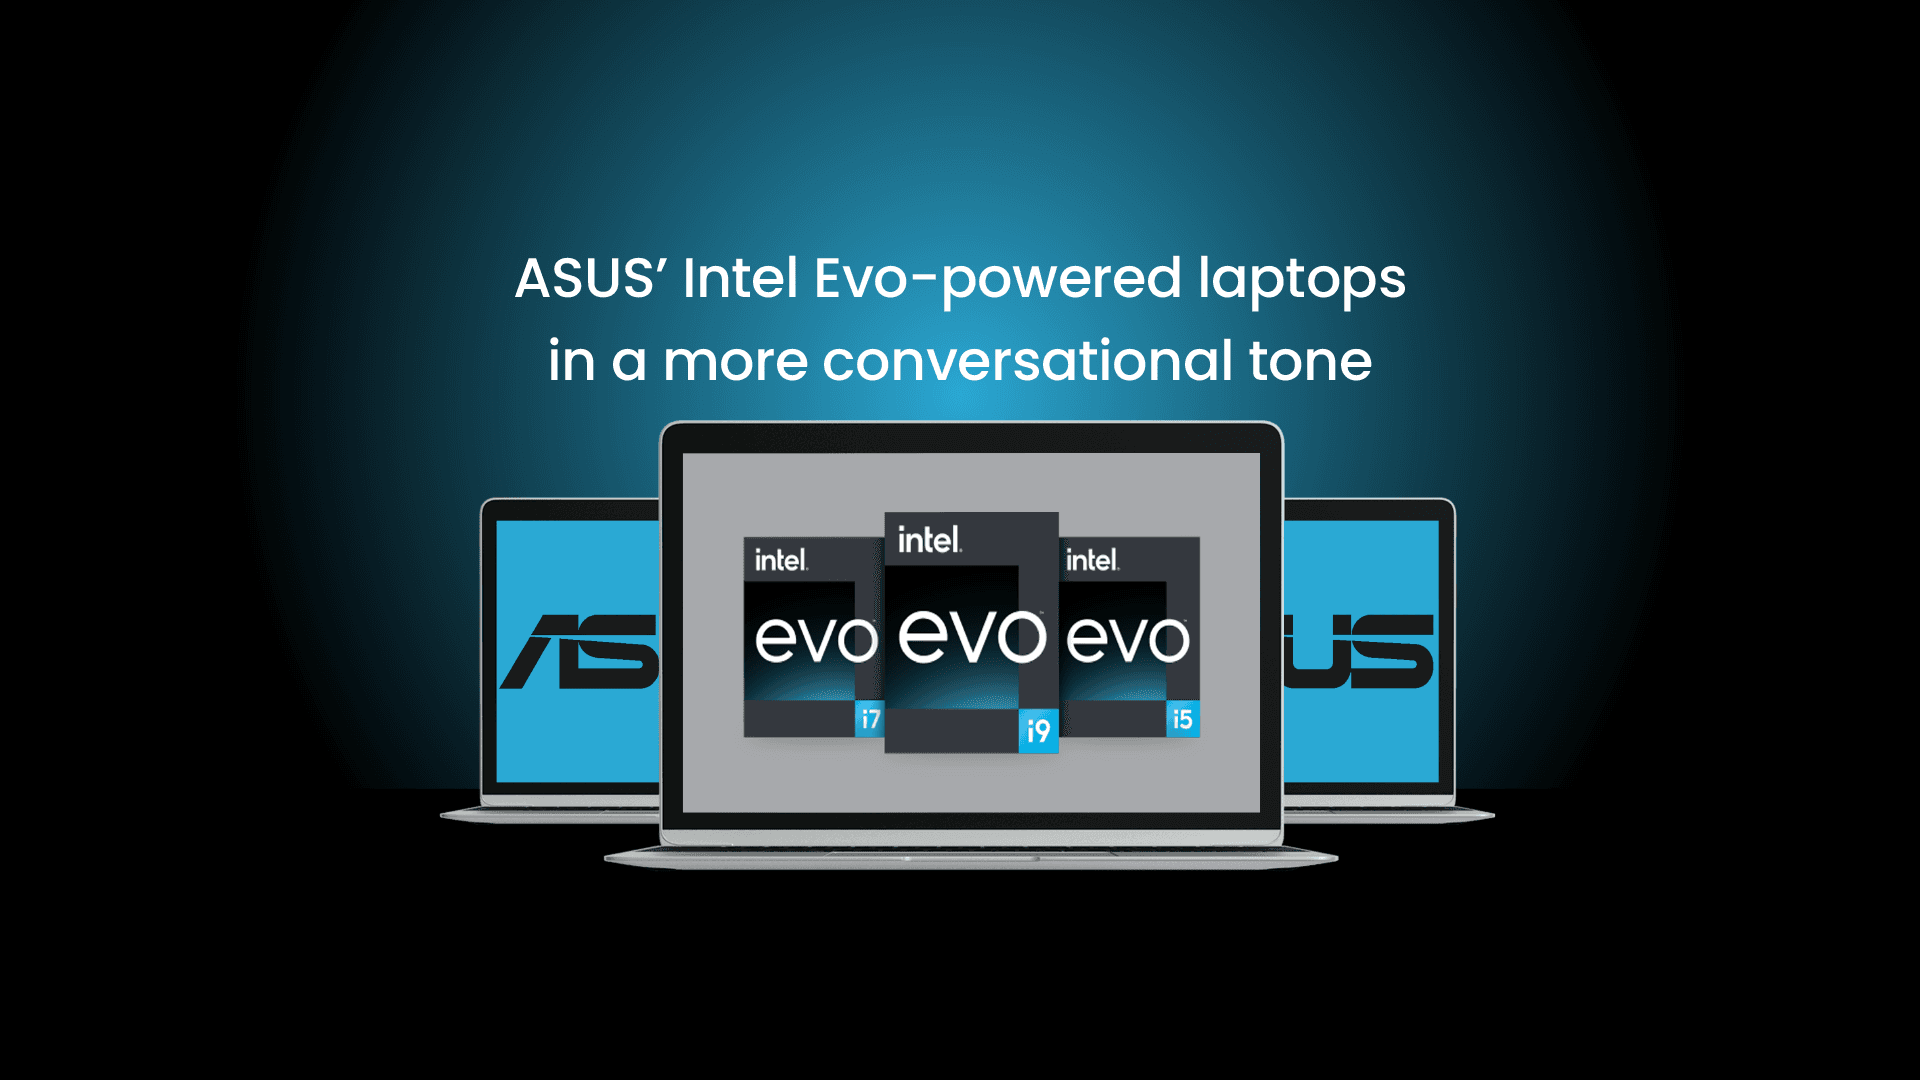 ASUS Intel Evo-powered laptops in a more conversational tone